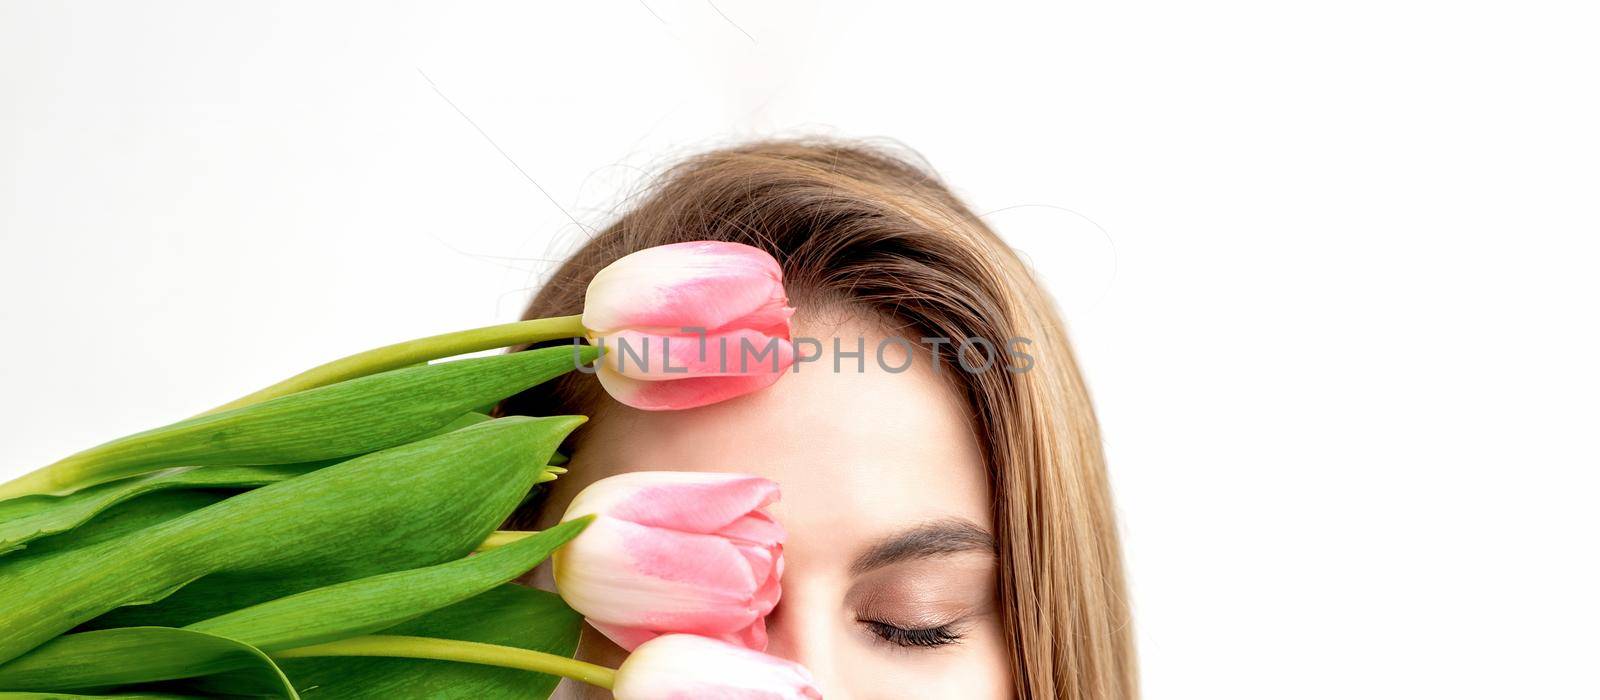 Half face portrait of a happy young caucasian woman with closed eyes and pink tulips cover her face against a white background